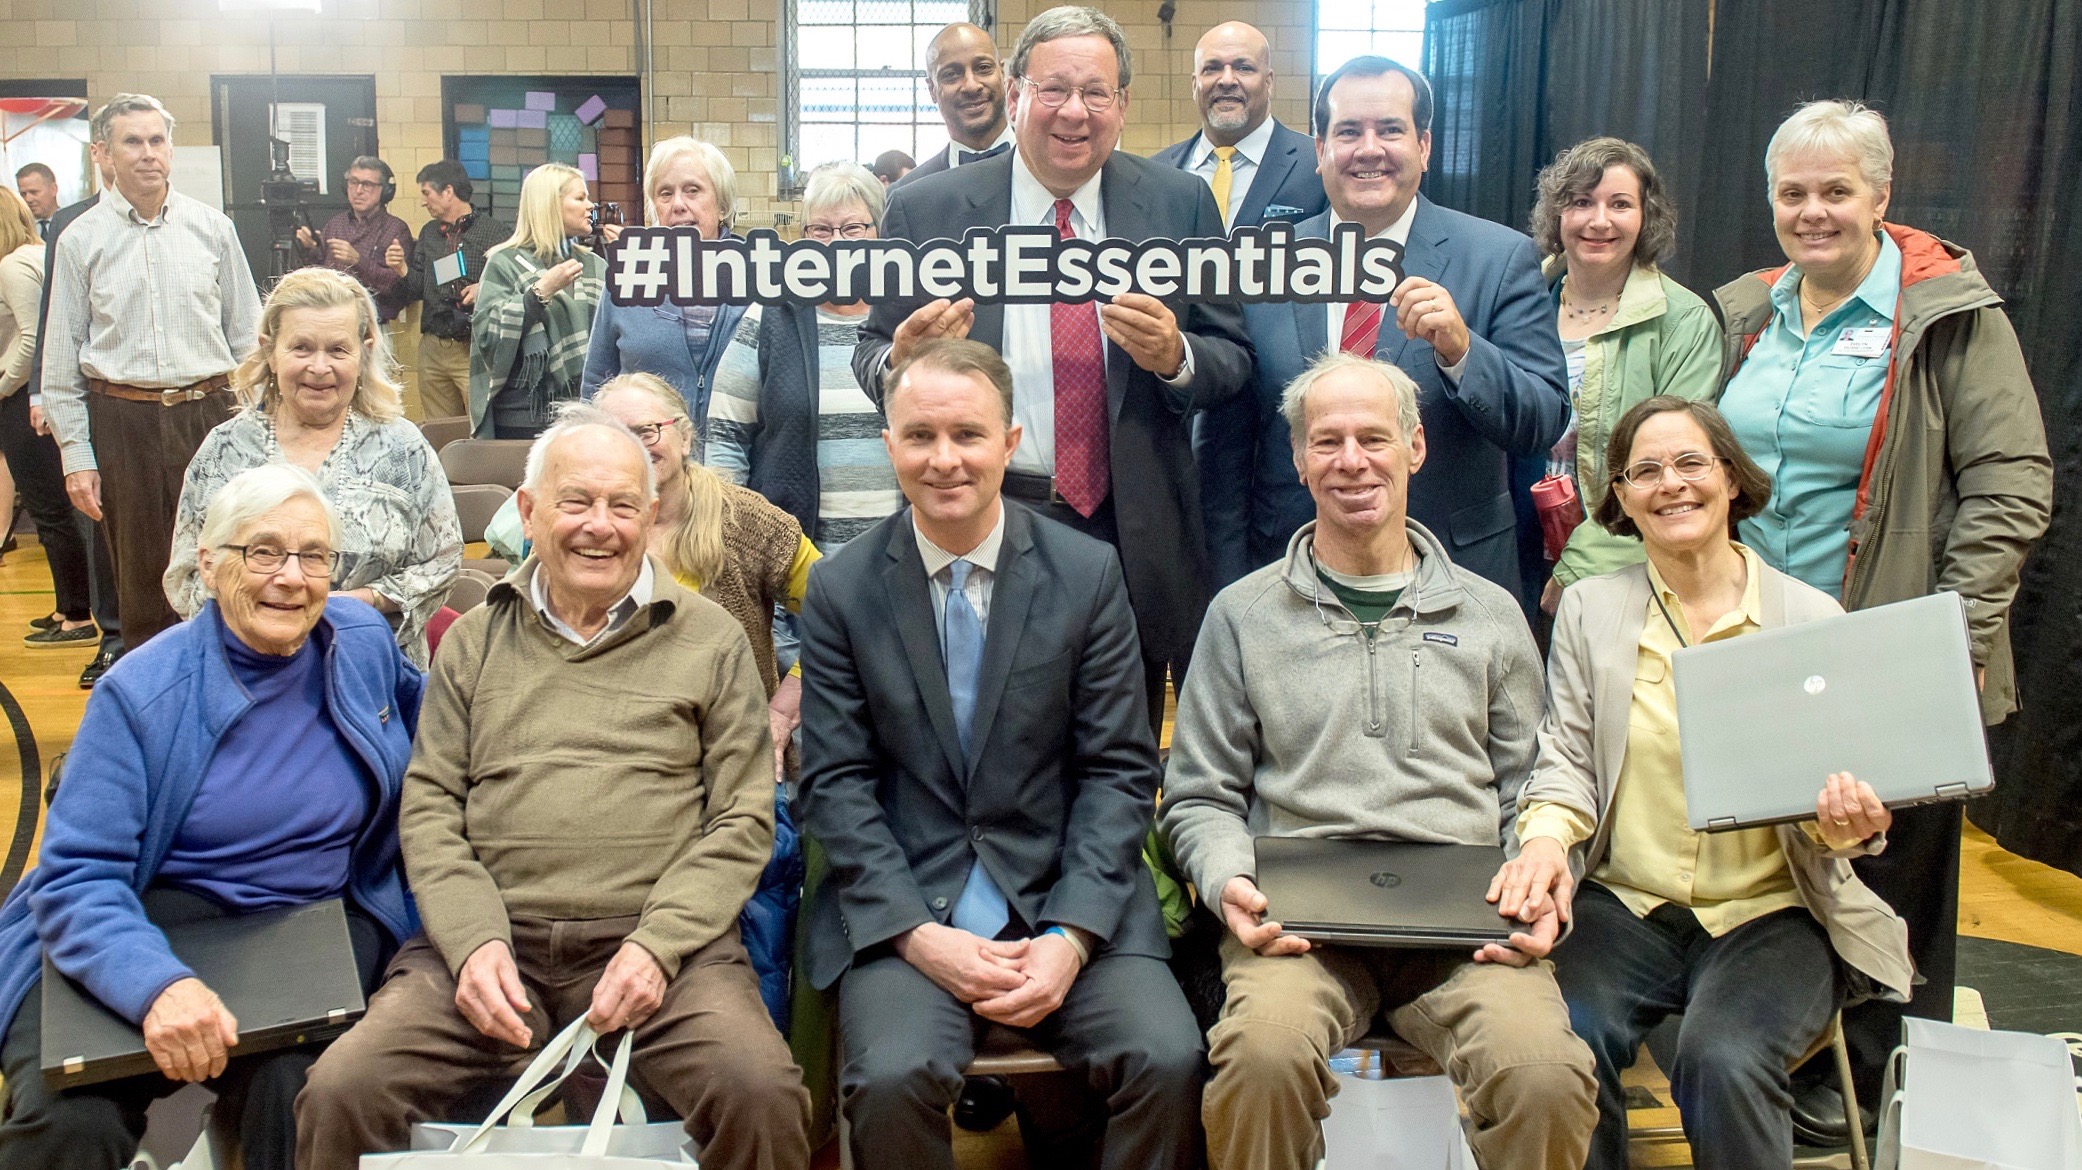 David L. Cohen, Comcast Corporation’s Senior Executive Vice President and Chief Diversity Officer, stands with a group of senior Internet Essentials recipients.